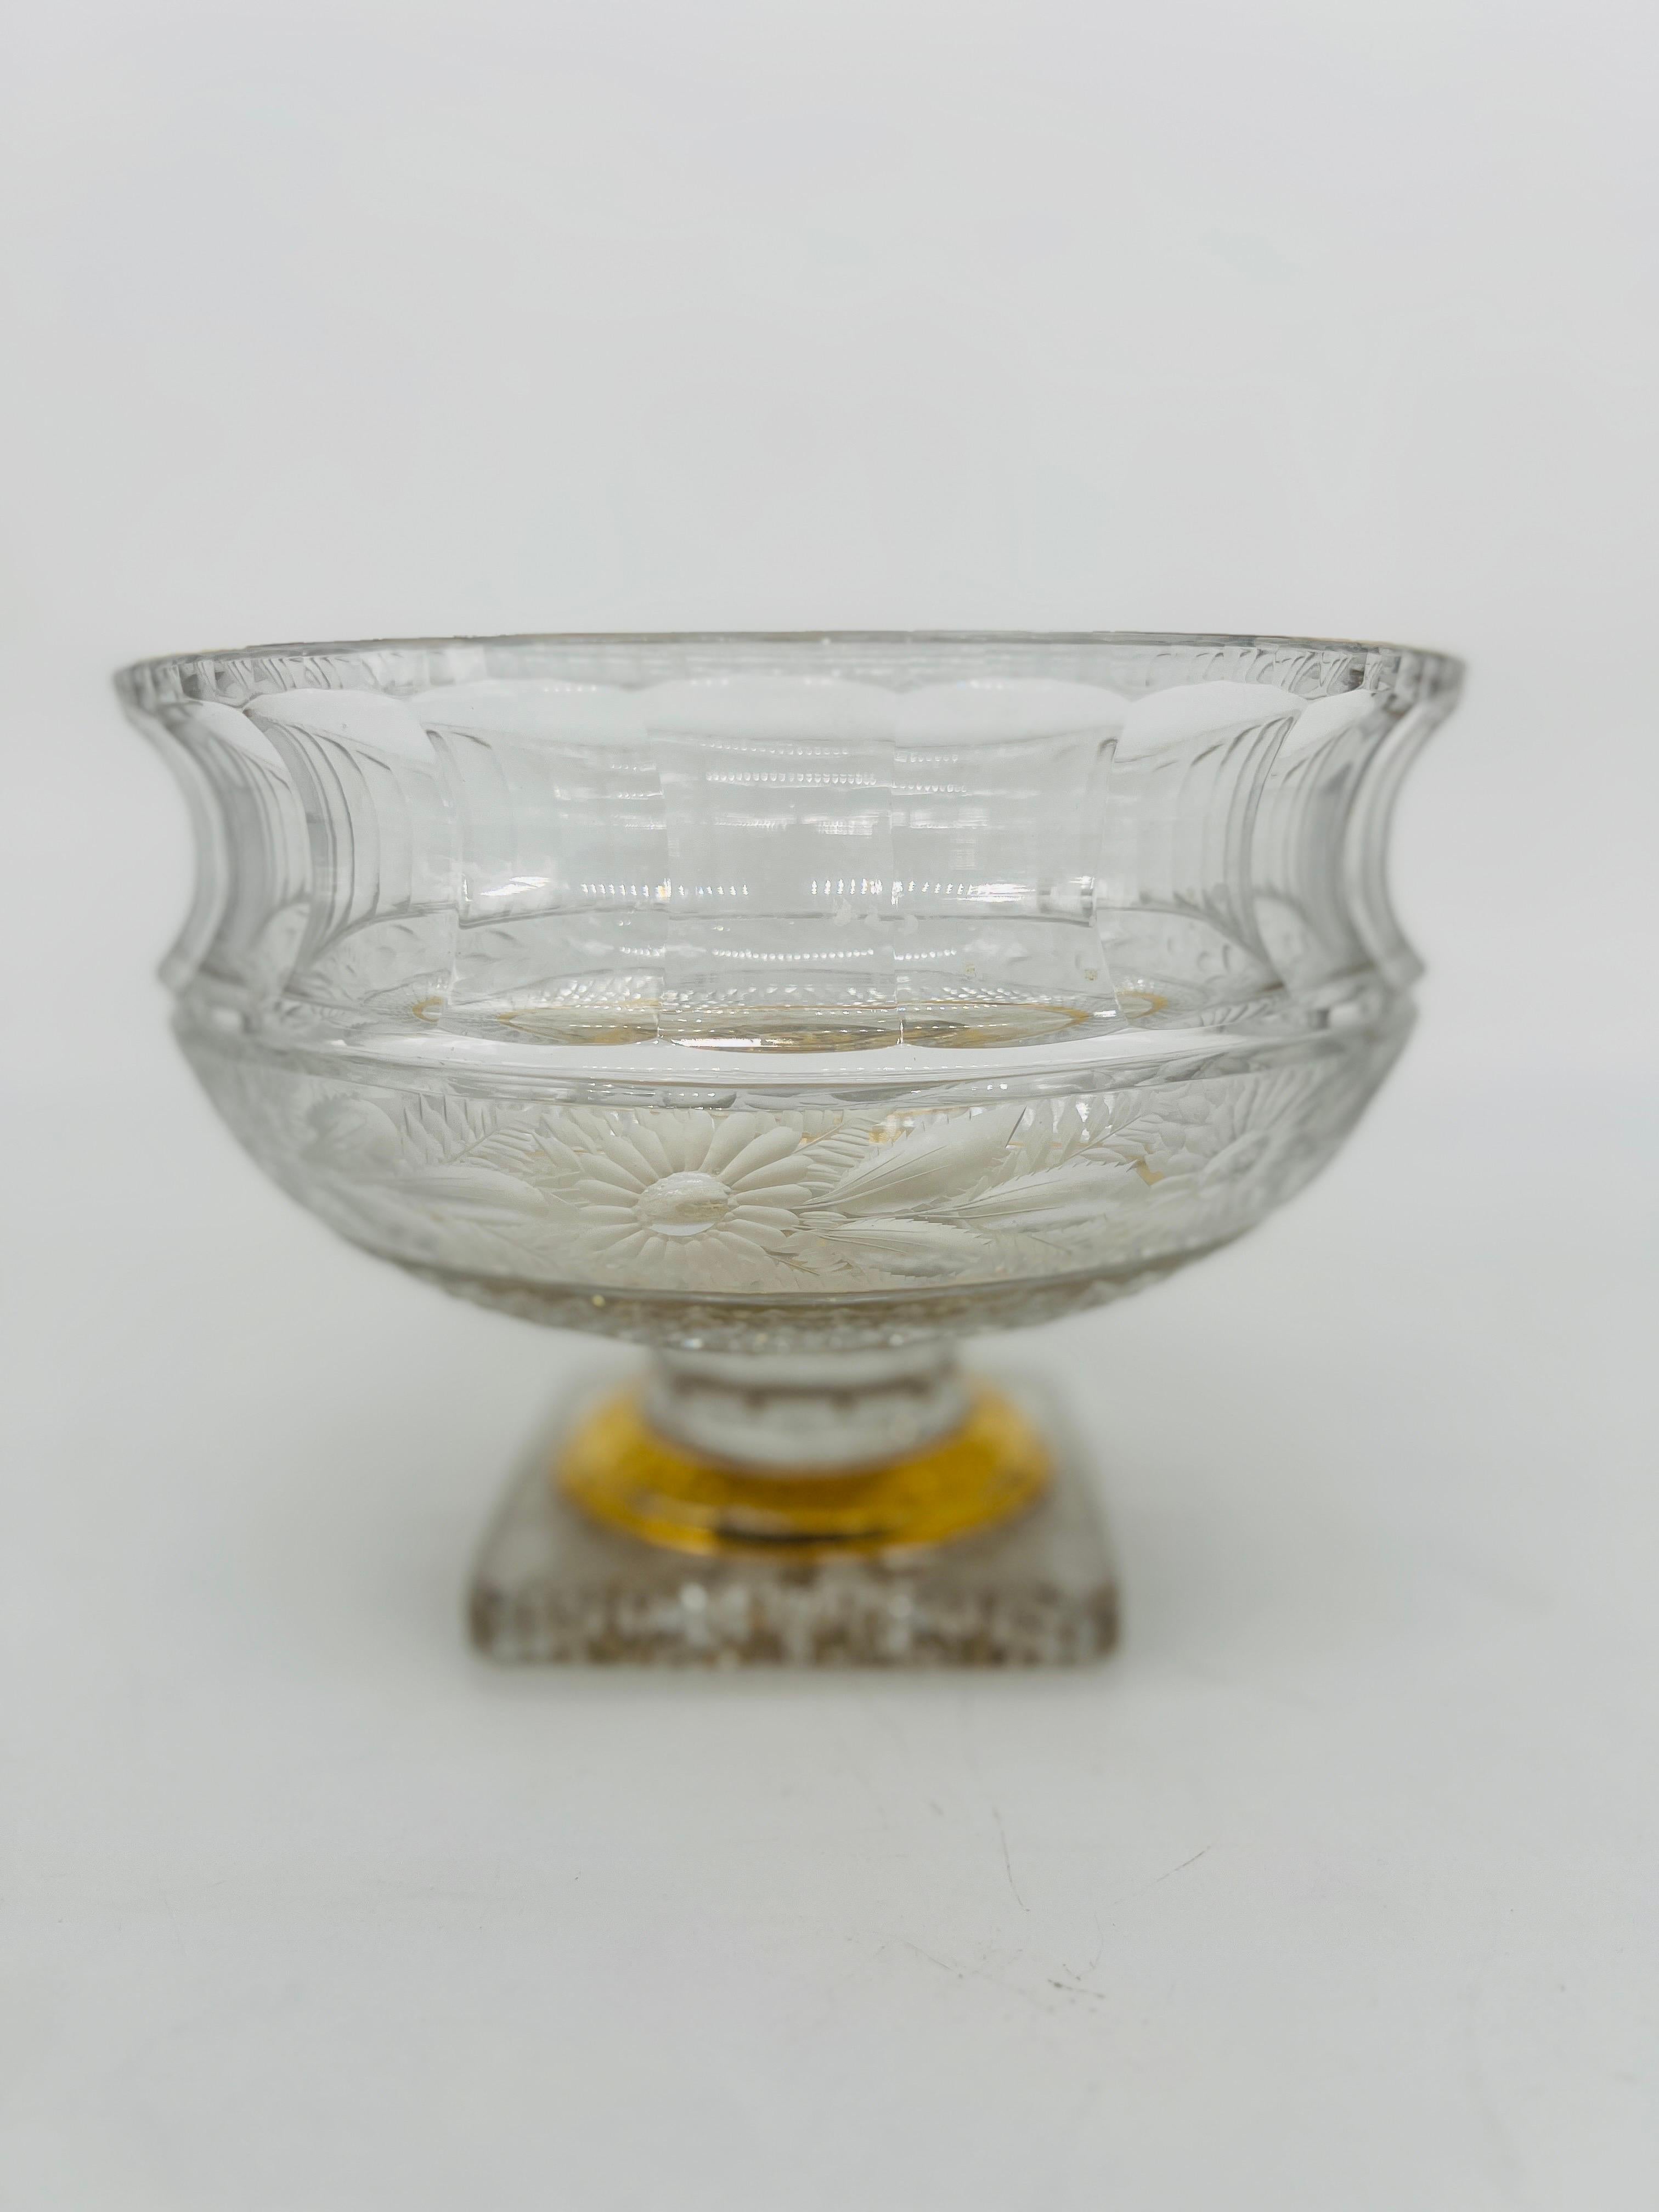 Bohemian Moser Intaglio Cut Glass & Gilt Punch Bowl
Large scale punch bowl with intaglio cut sunflowers to the outer edge of bowl, gilt rim, speckled gilt interior and fine cuts to surface.